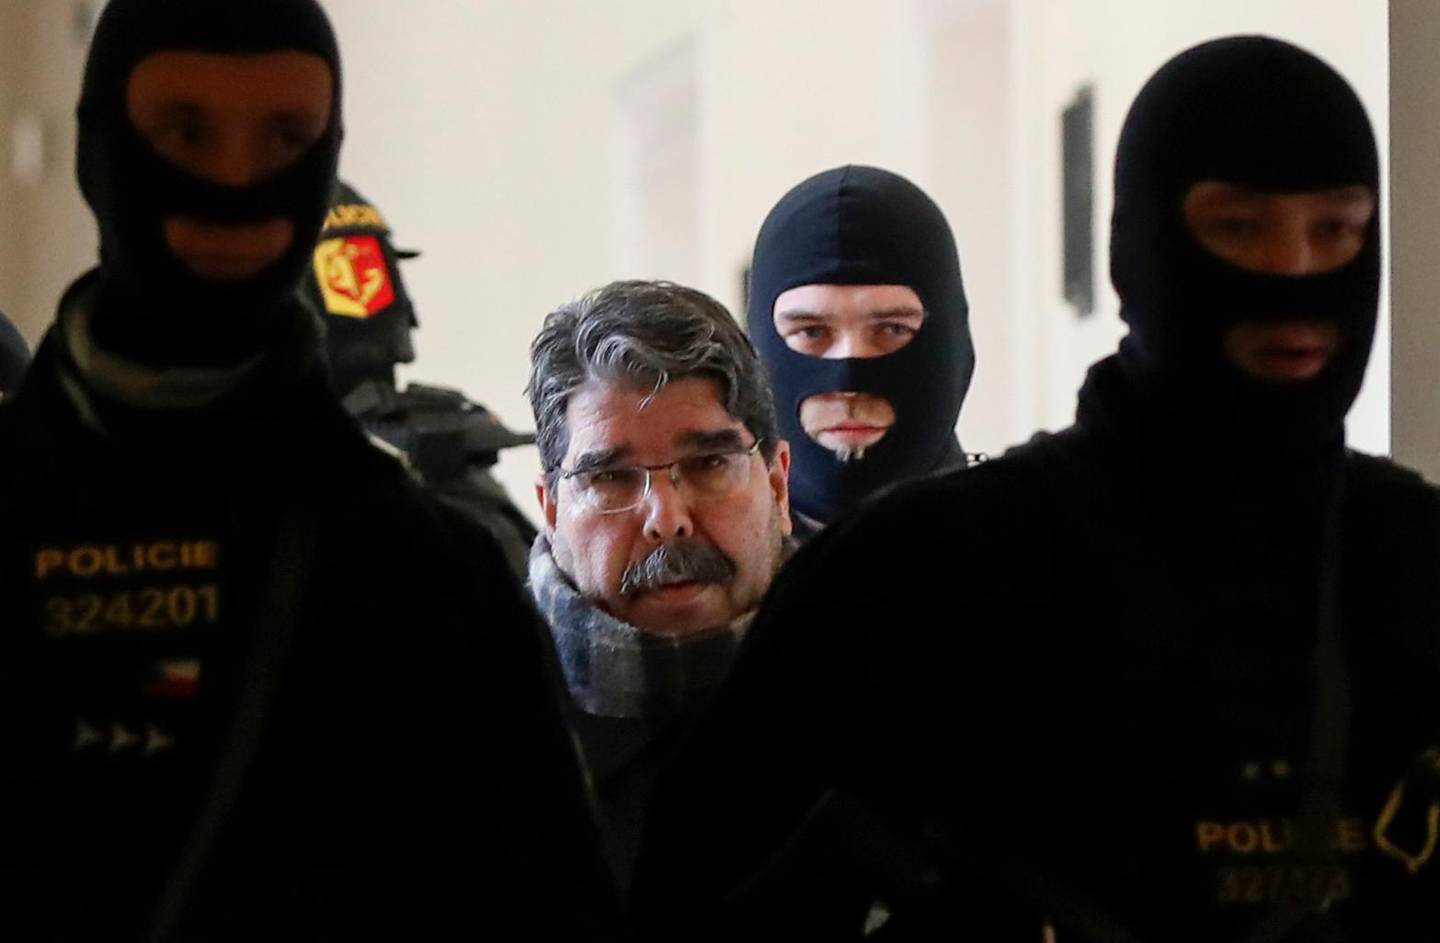 Syrian Kurdish leader Saleh Muslim (C) is escorted by Czech police for his trial at the municipal court on February 27, 2018 in Prague.
A Czech court released Muslim, who was detained at the weekend and is wanted by Turkey on terror charges, his lawyer said. The former leader of the Syrian Kurdish Democratic Union Party (PYD) is still a figurehead for Kurds in Syria. / AFP PHOTO / Stringer / ALTERNATIVE CROP 